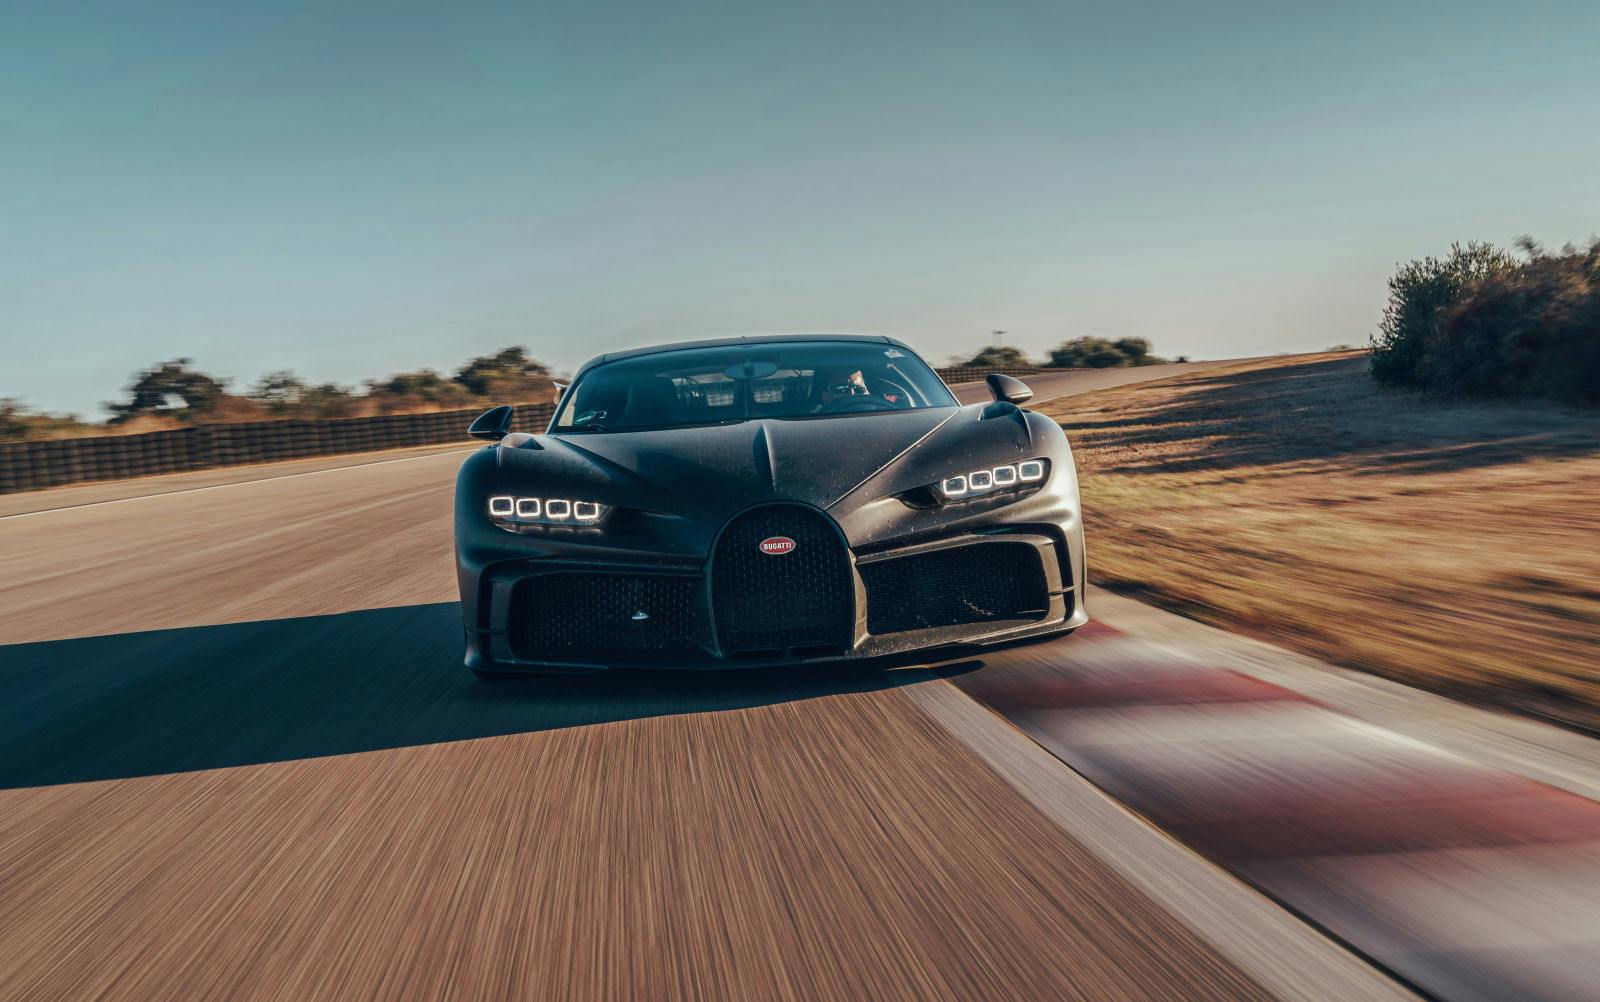 Bugatti Official Pilot Andy Wallace tests a pre-series prototype of the Chiron Pur Sport at the Nardò proving ground in Apulia, Italy.